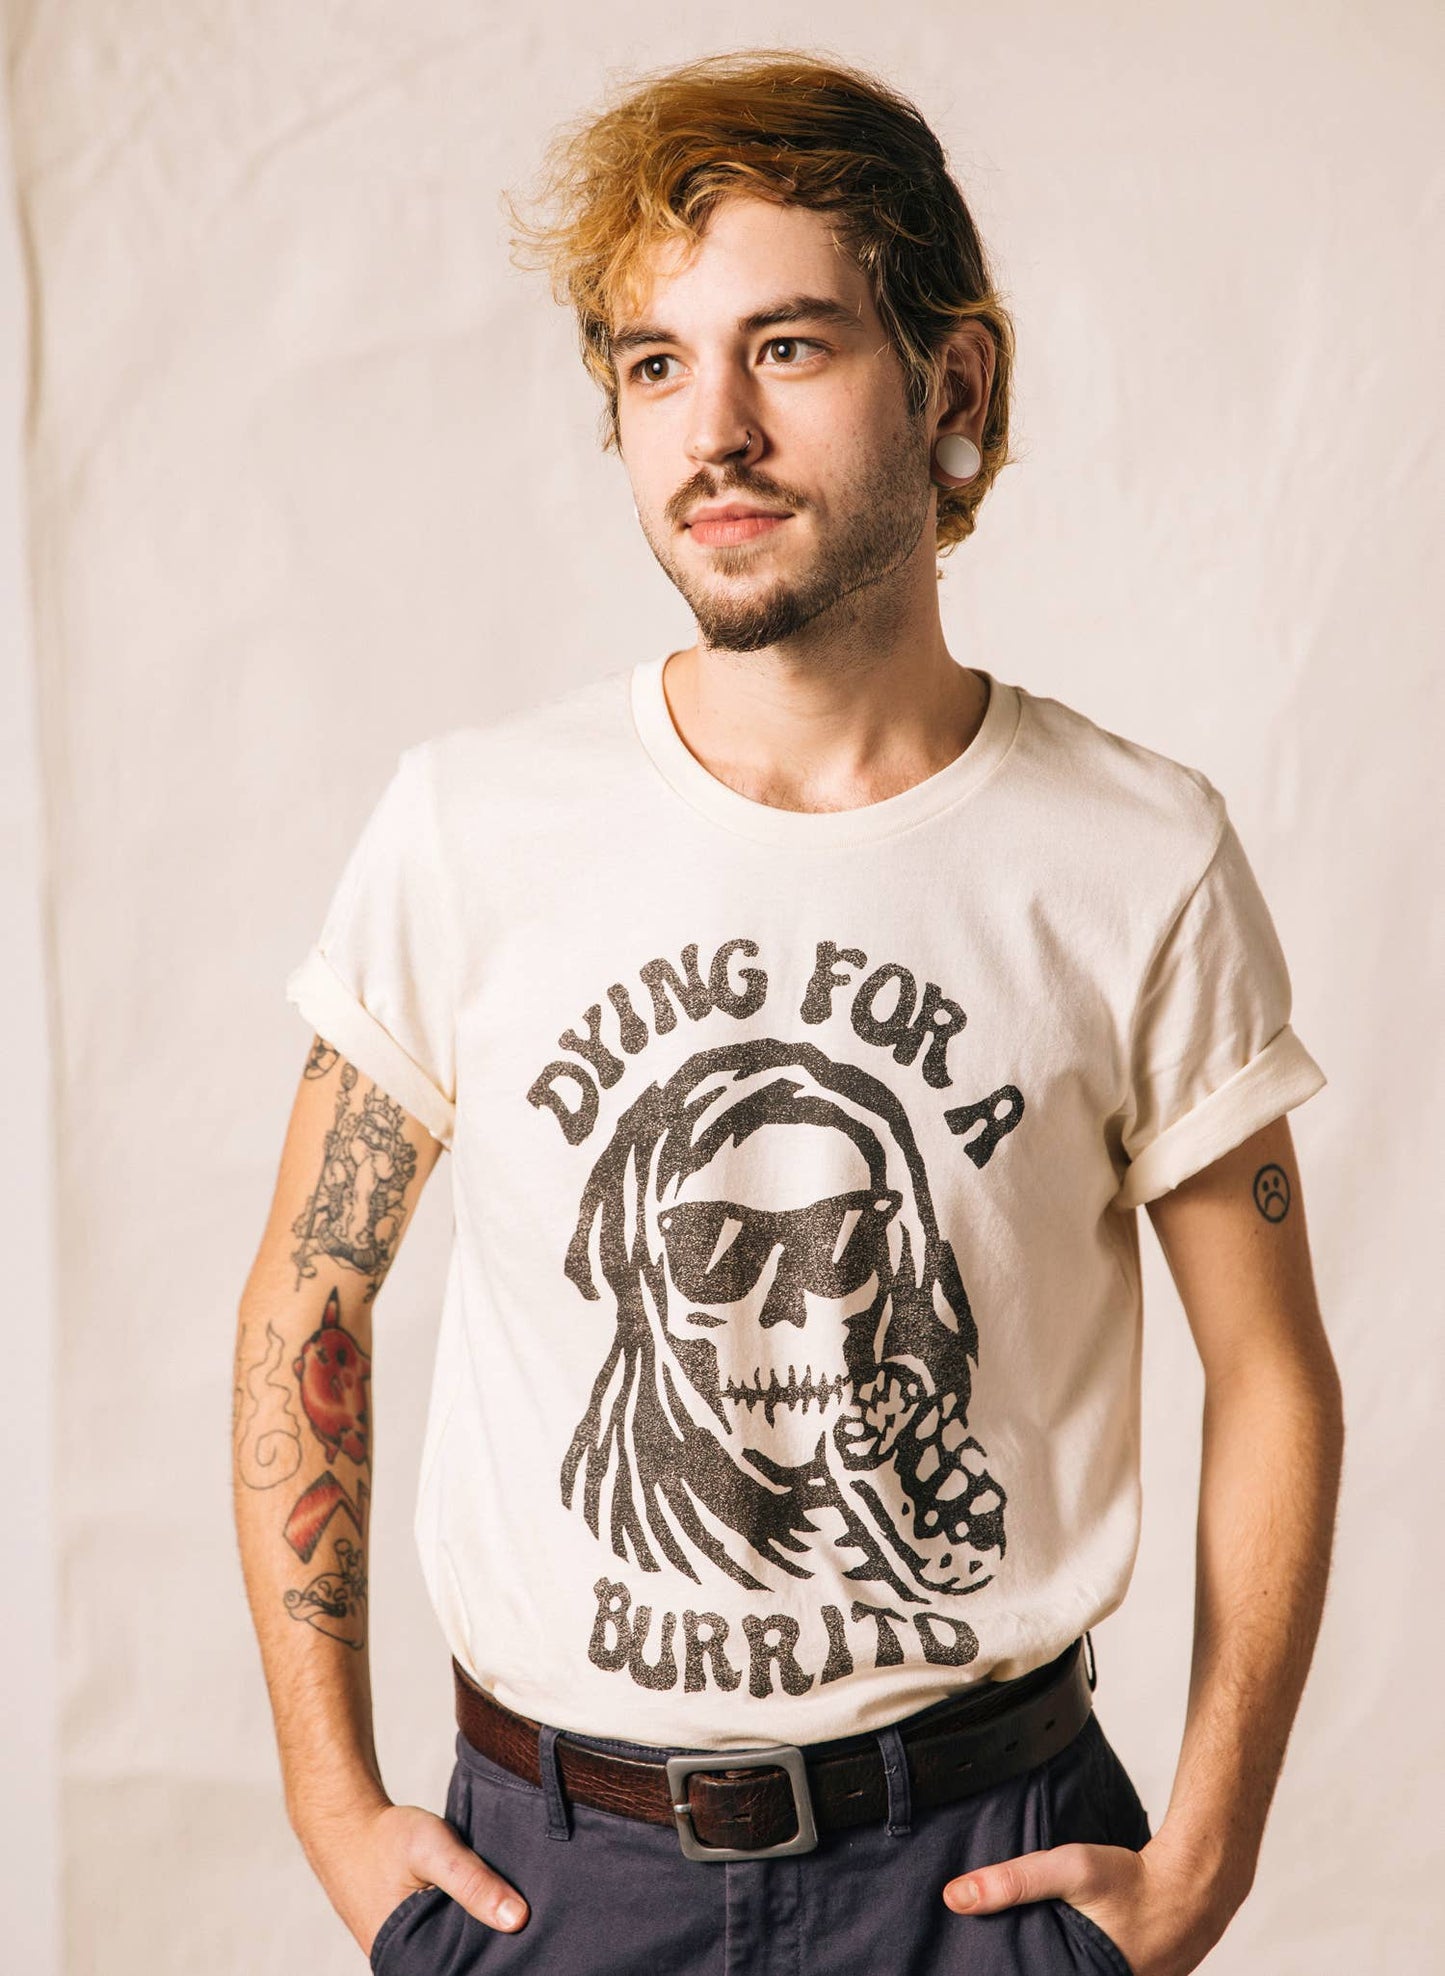 Dying for a Burrito Tee Black